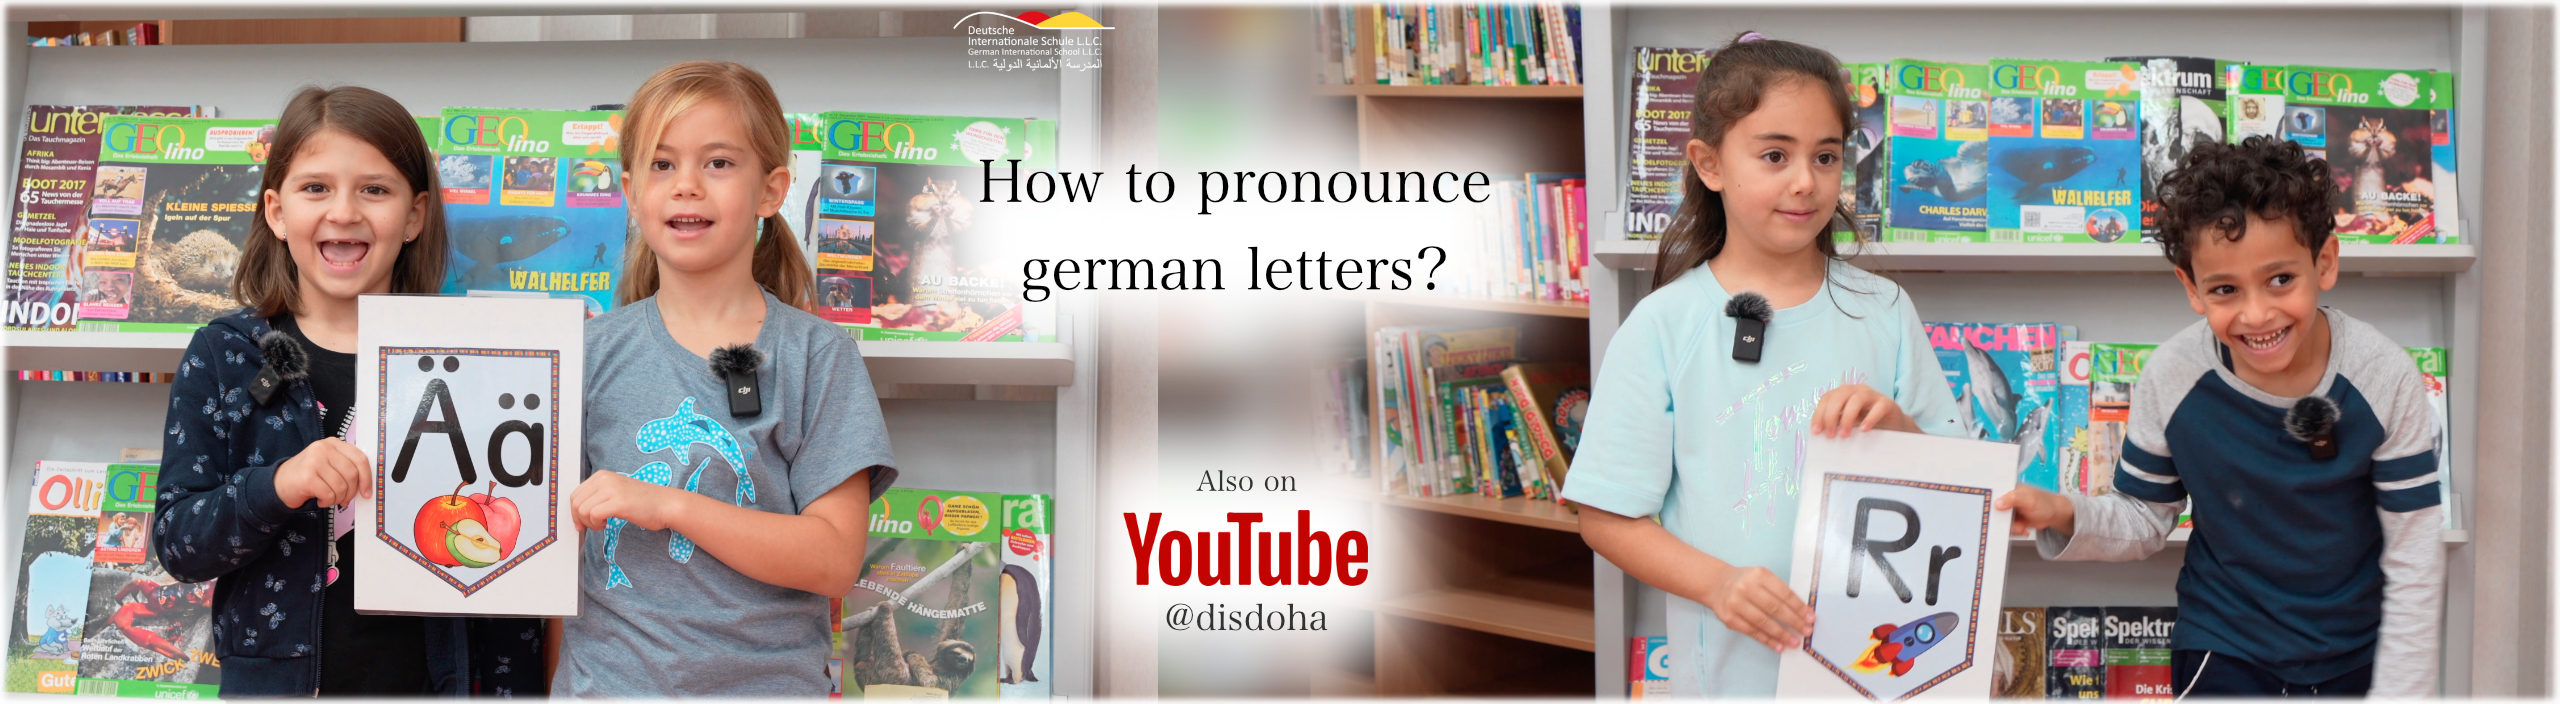 How to pronounce german letters?